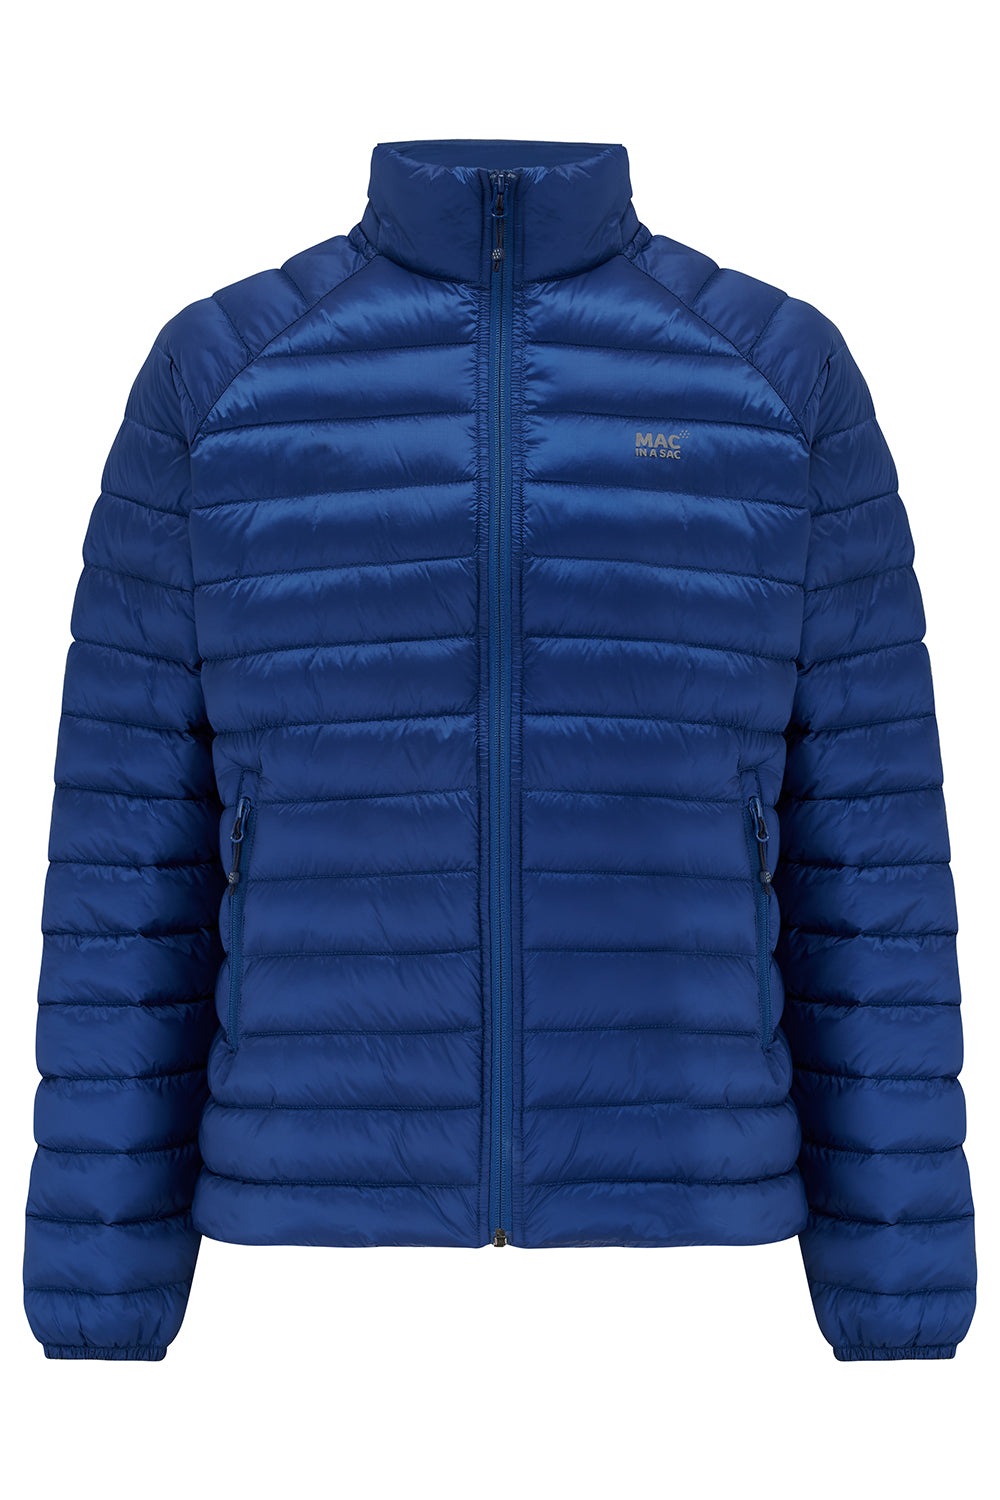 Synergy -  Men's Insulated Jacket - Sapphire Blue